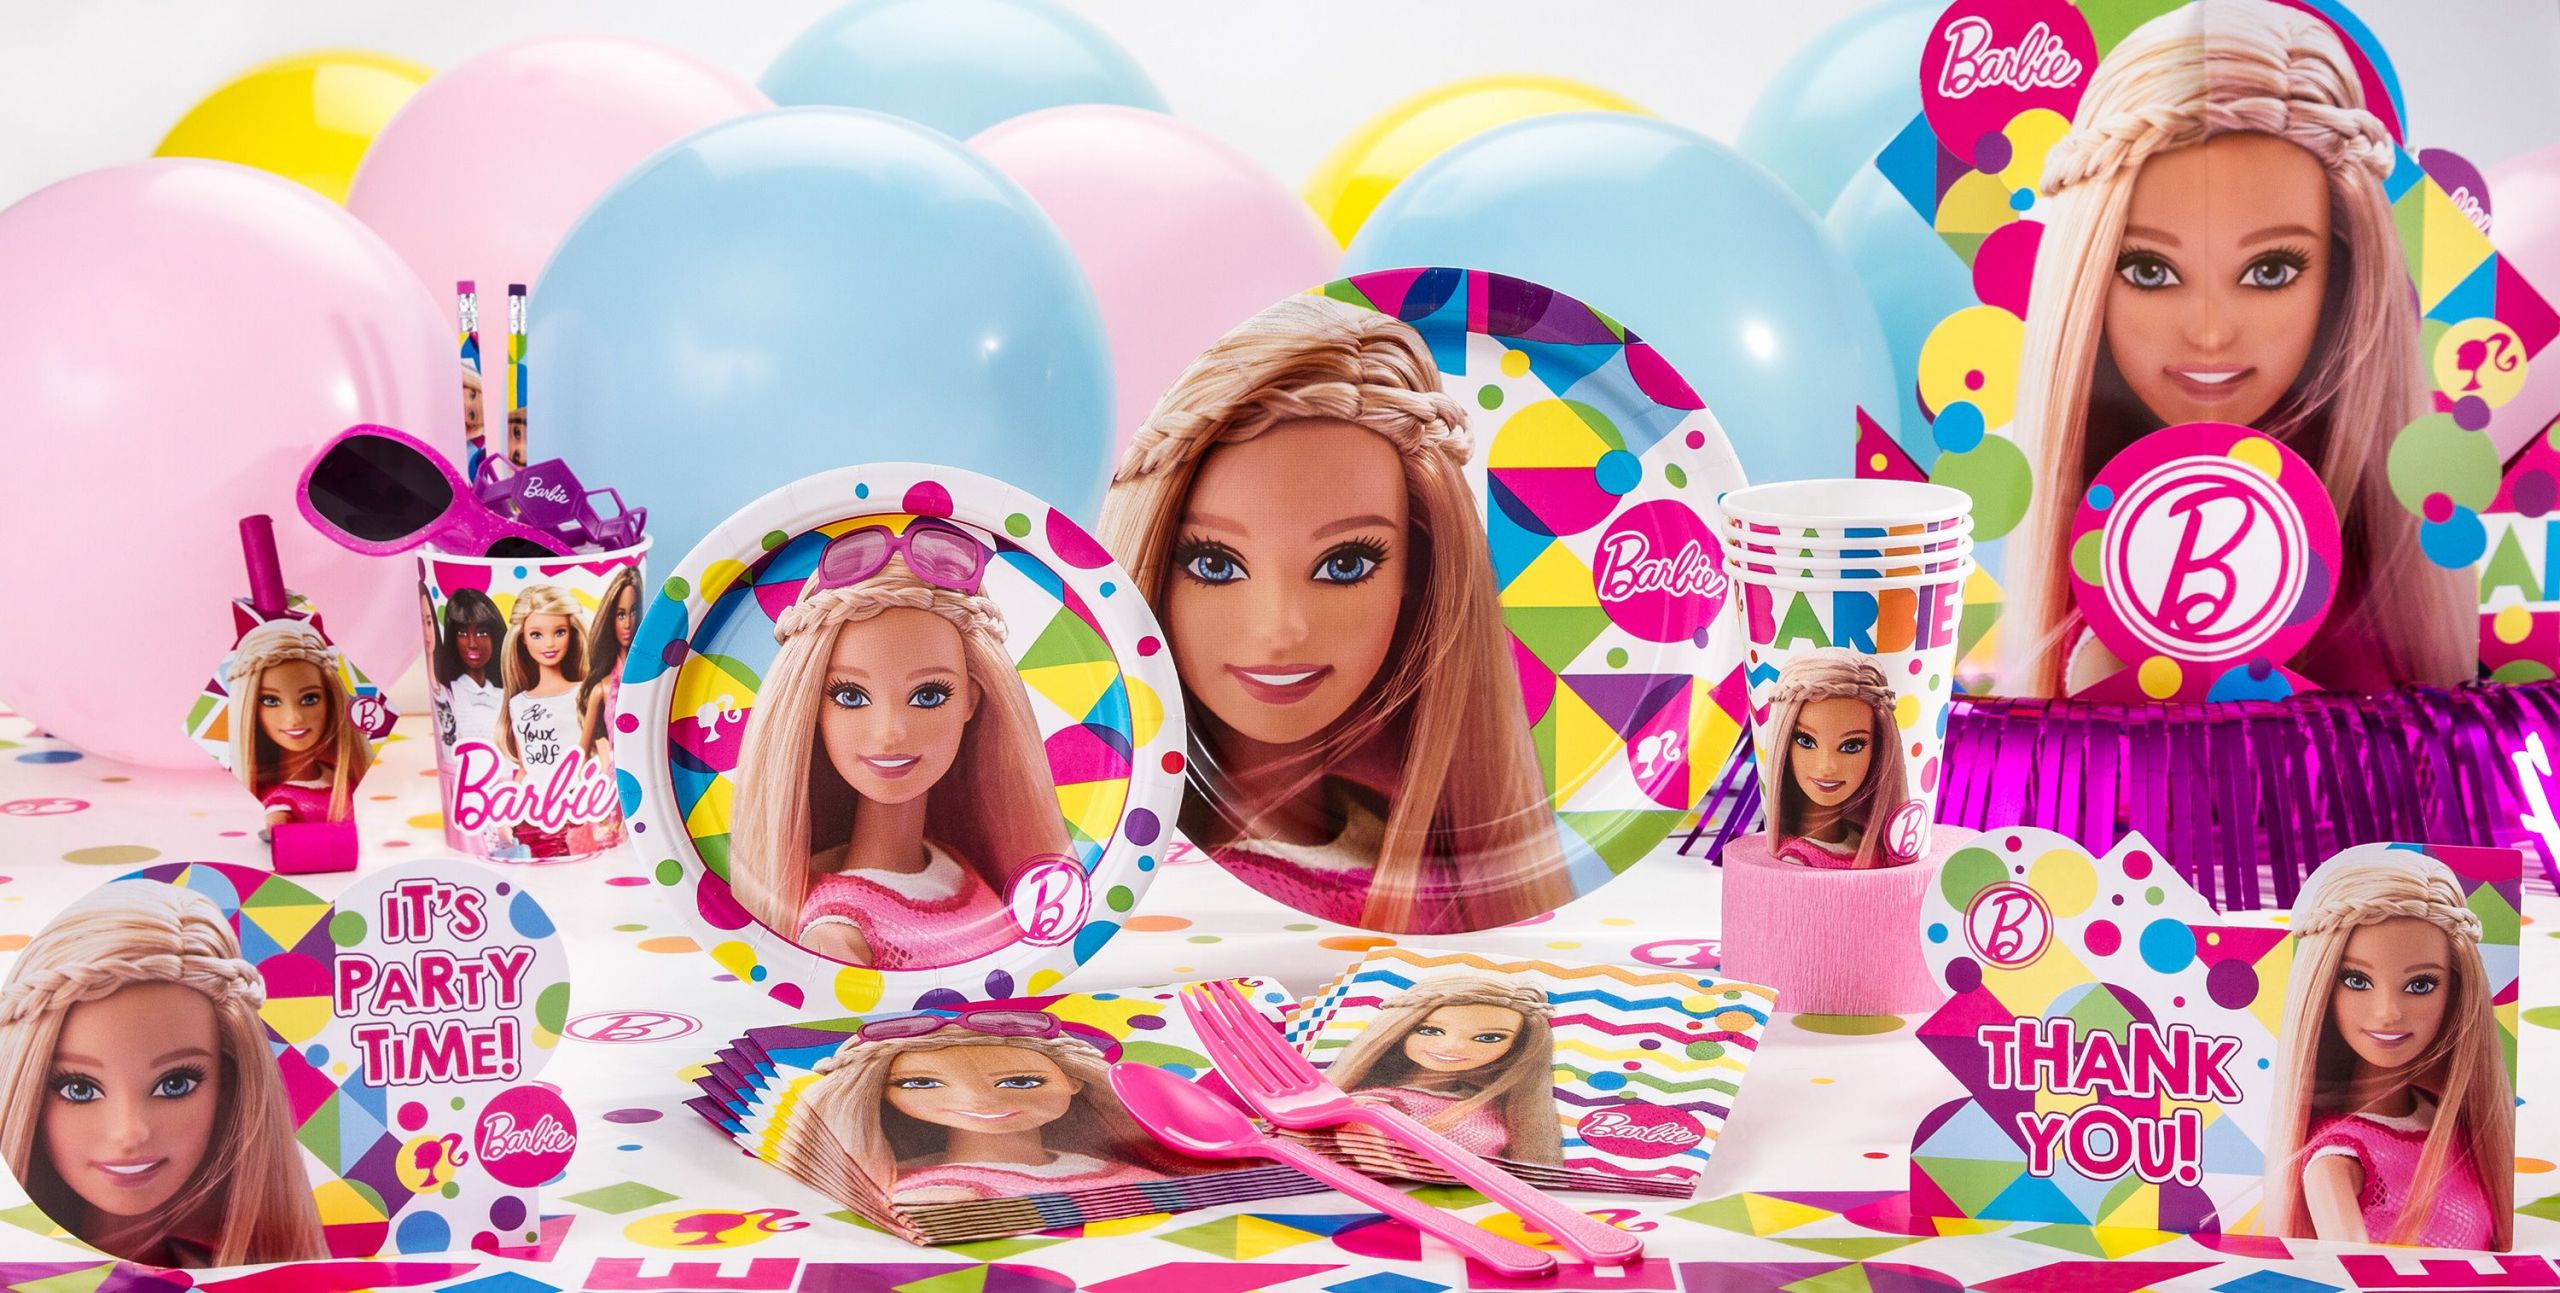 Party City Girl Birthday Decorations
 Barbie Party Supplies Barbie Birthday